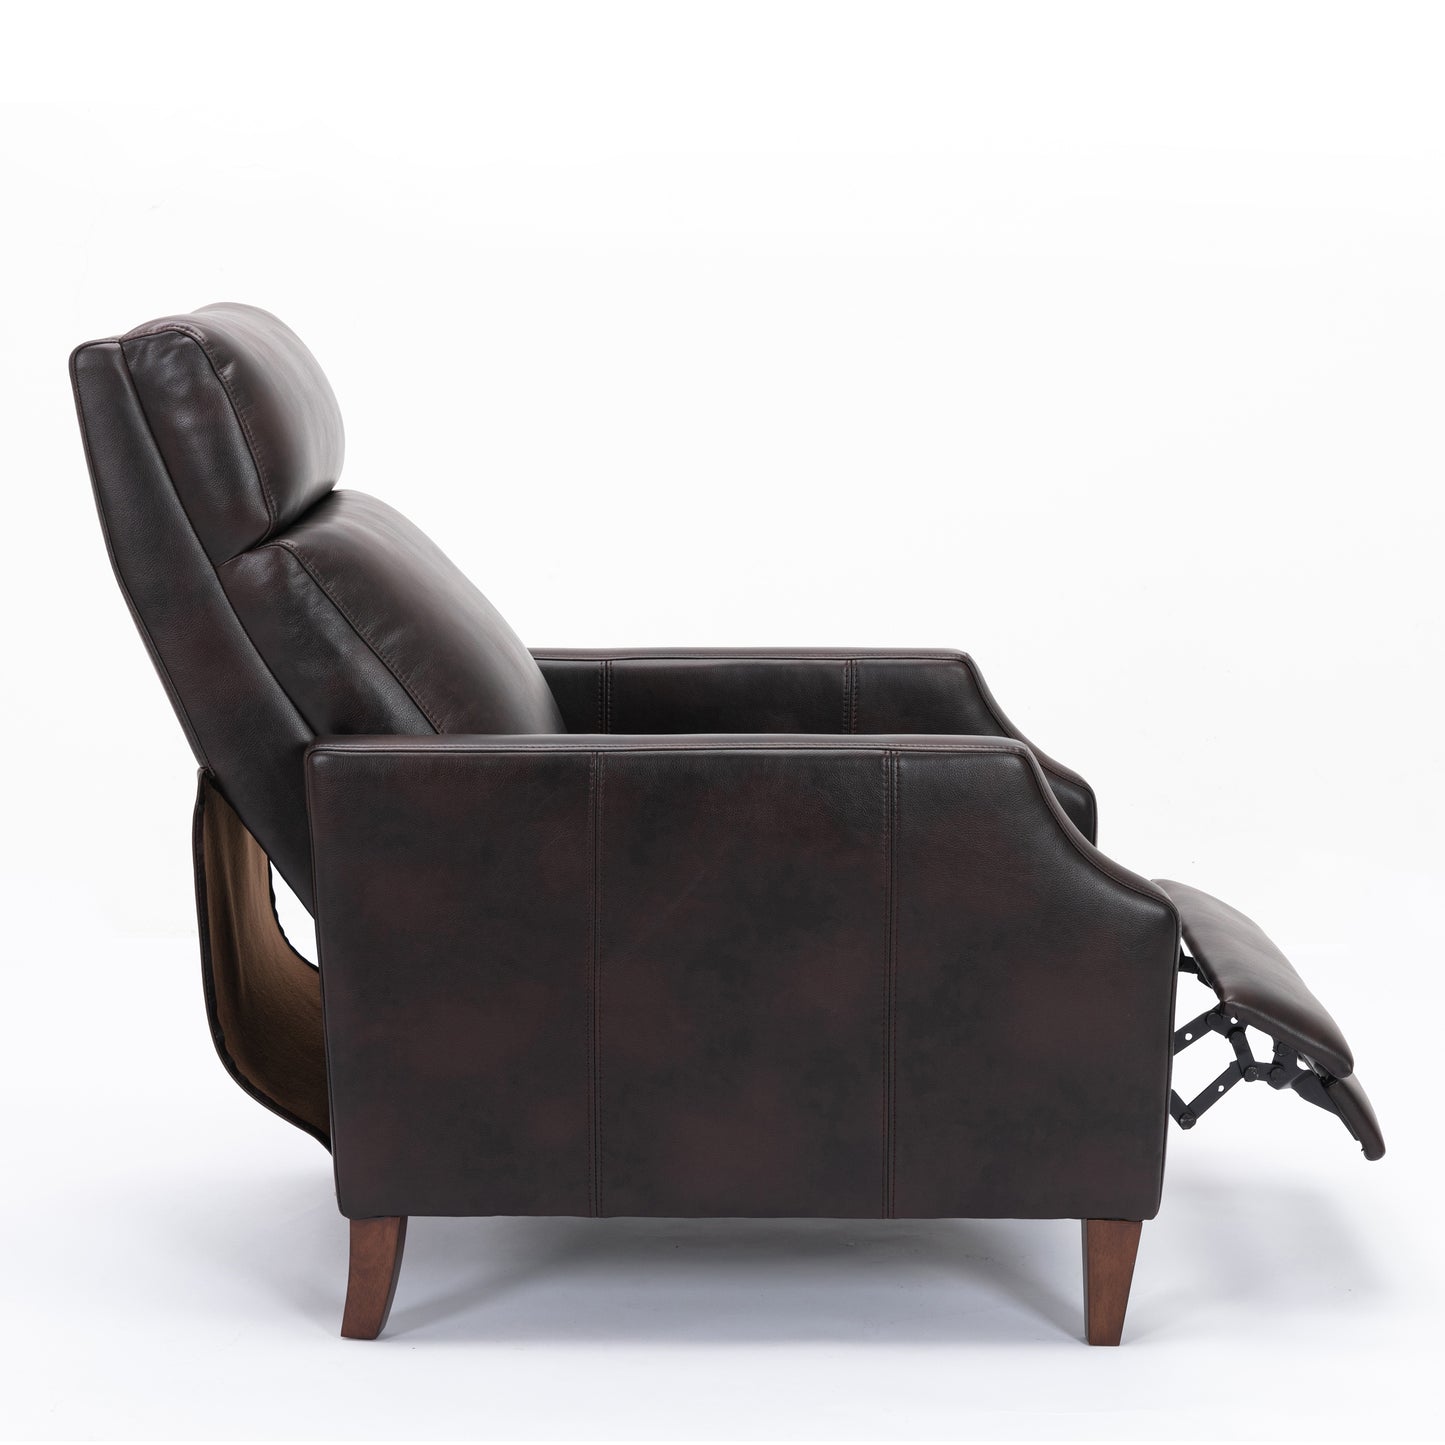 Biscoe Burnished Brown PU Leather Recliner - Stylish and Comfortable relaxer